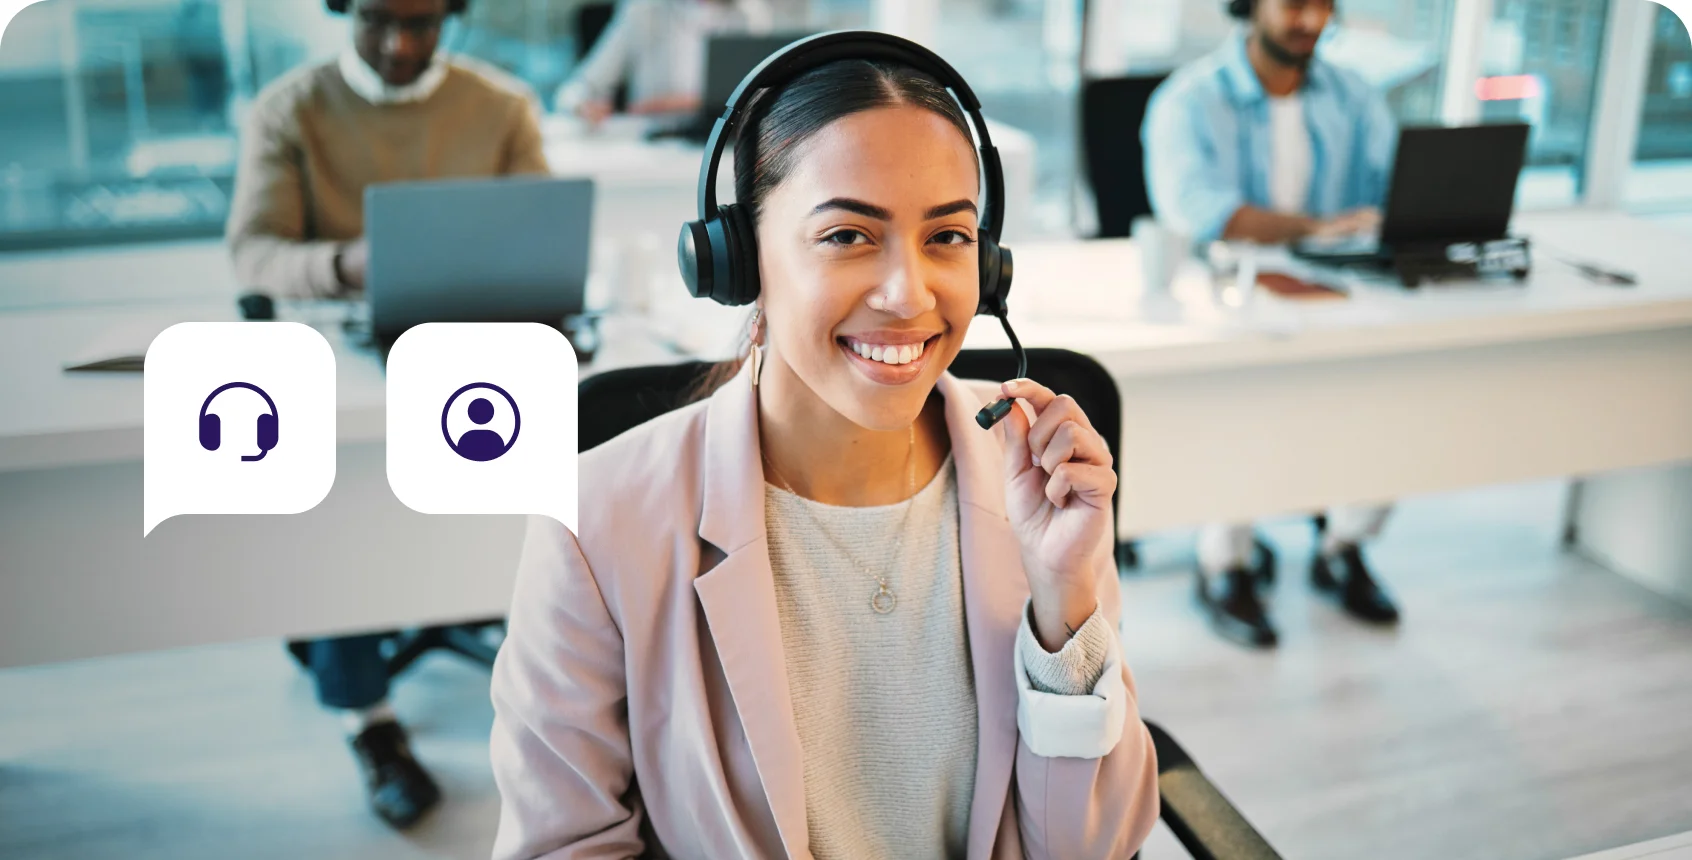 Call center agents – Responsibilities, skills & challenges